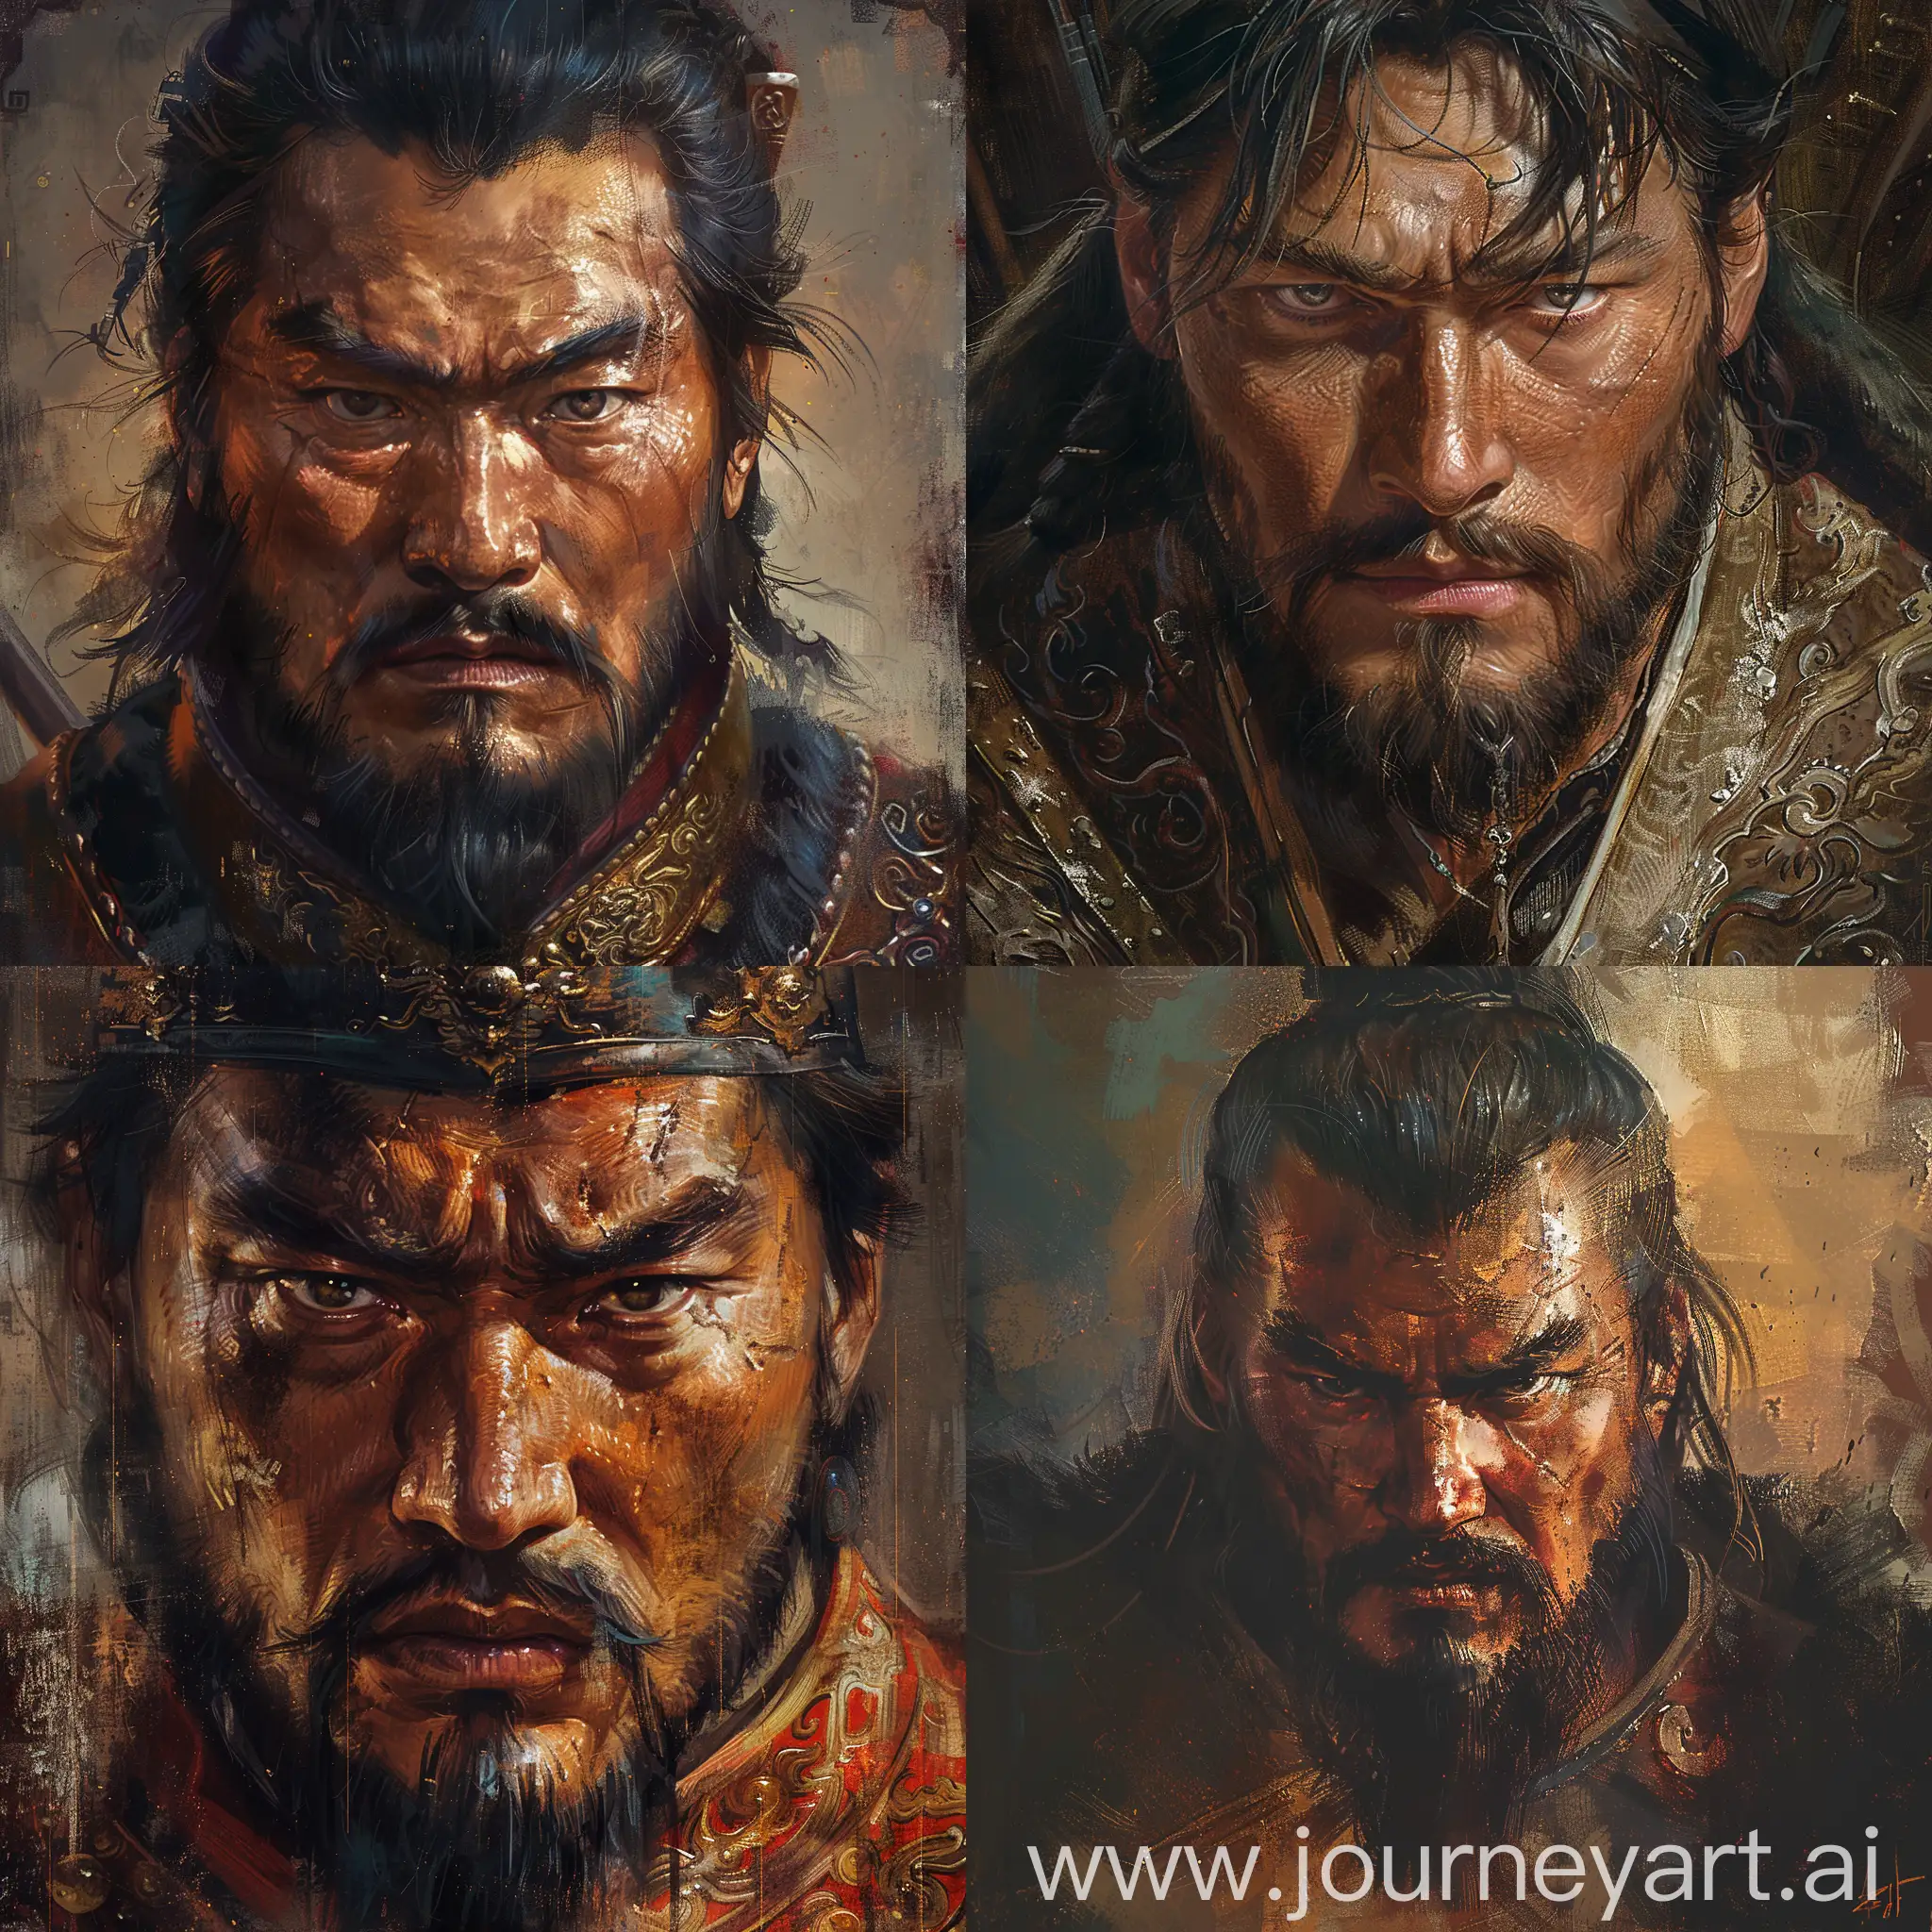 Intense-Genghis-Khan-Portrait-Classic-Oil-Painting-with-Rich-Colors-and-Dramatic-Lighting